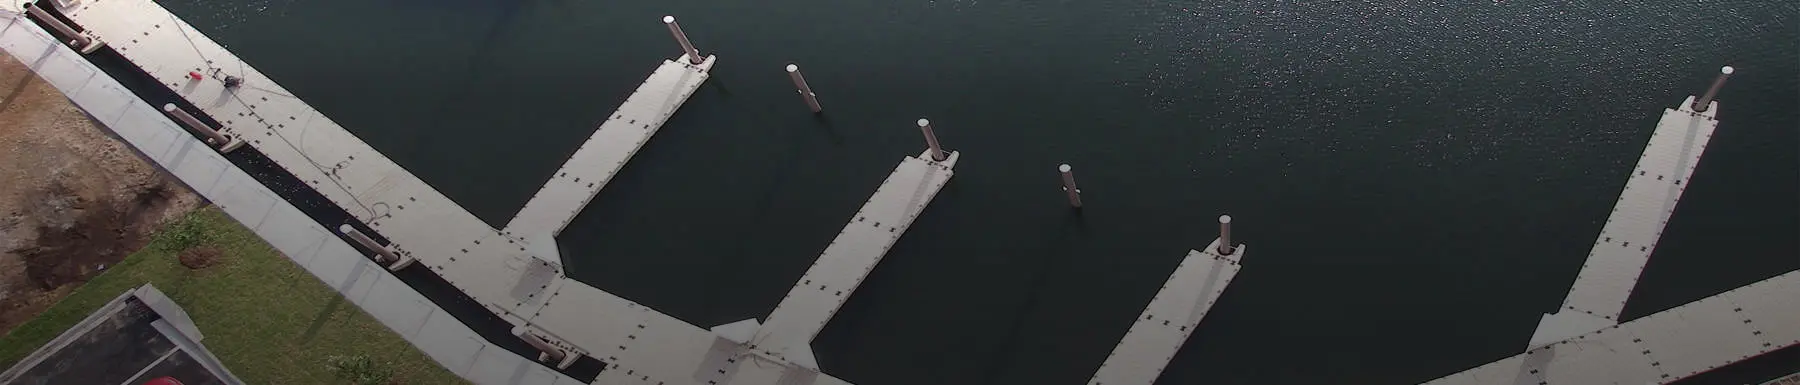 Overhead view of 4 docks with pylons